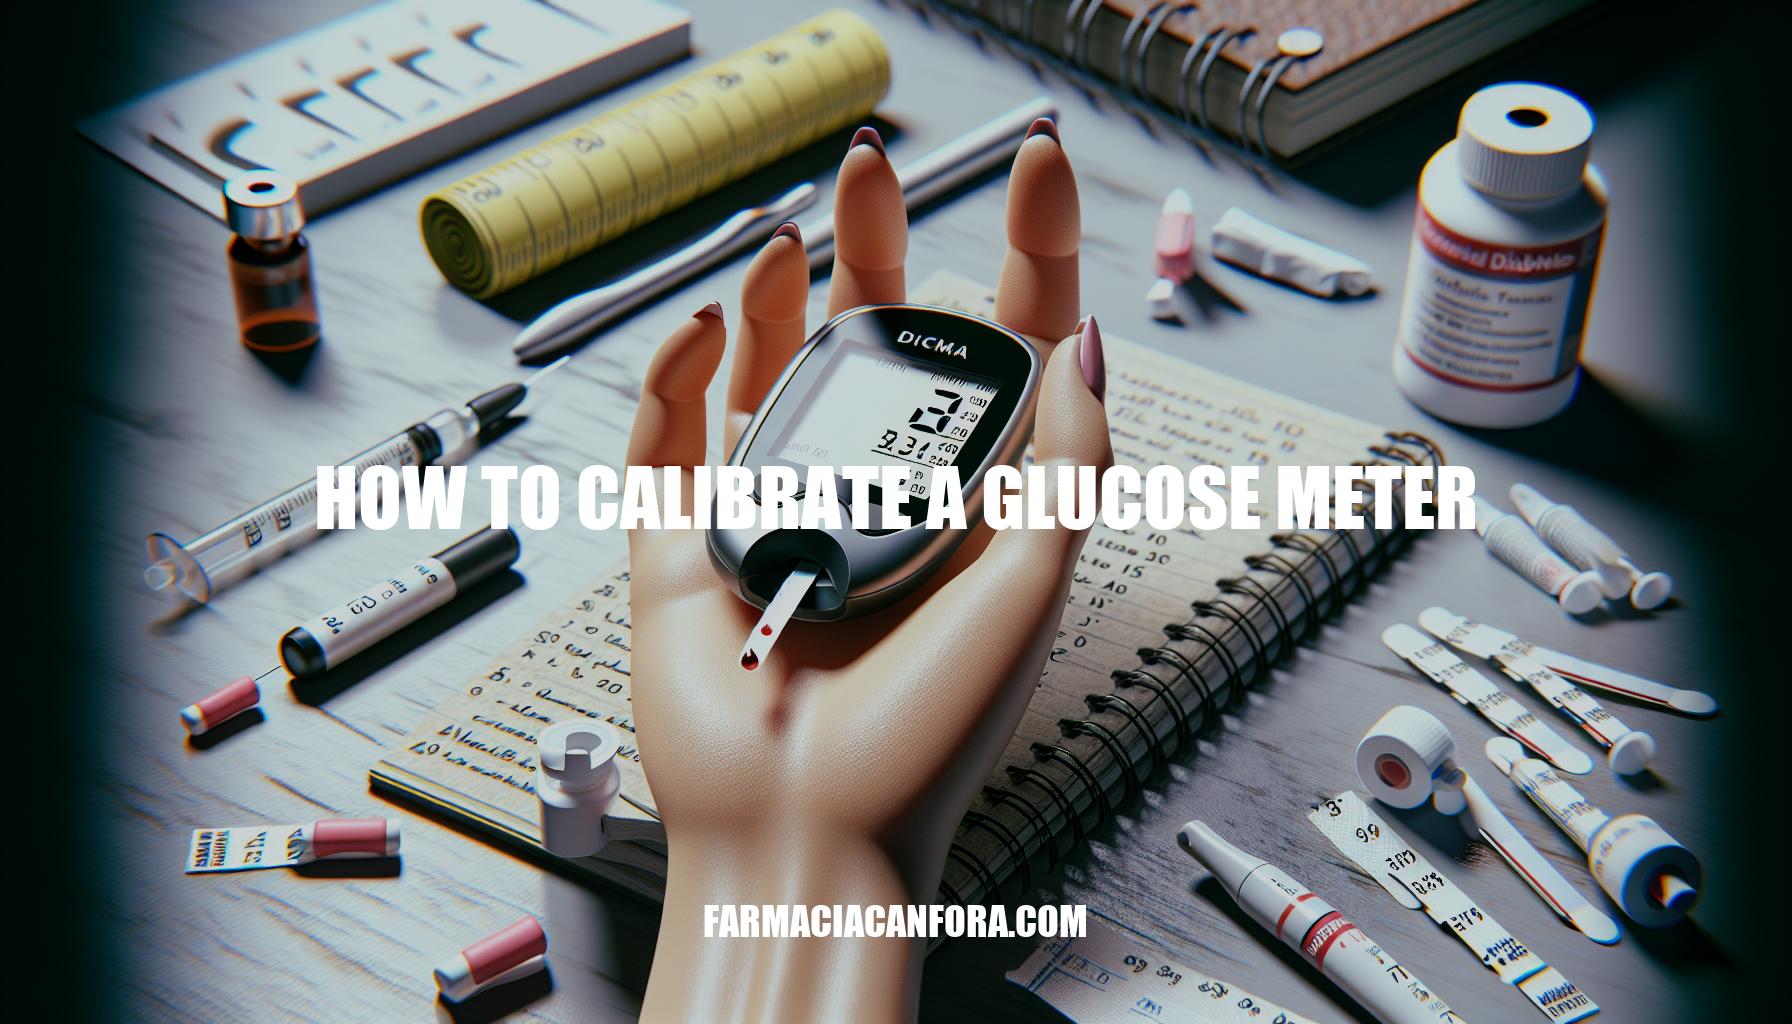 Guide to Calibrating a Glucose Meter: How to Calibrate a Glucose Meter